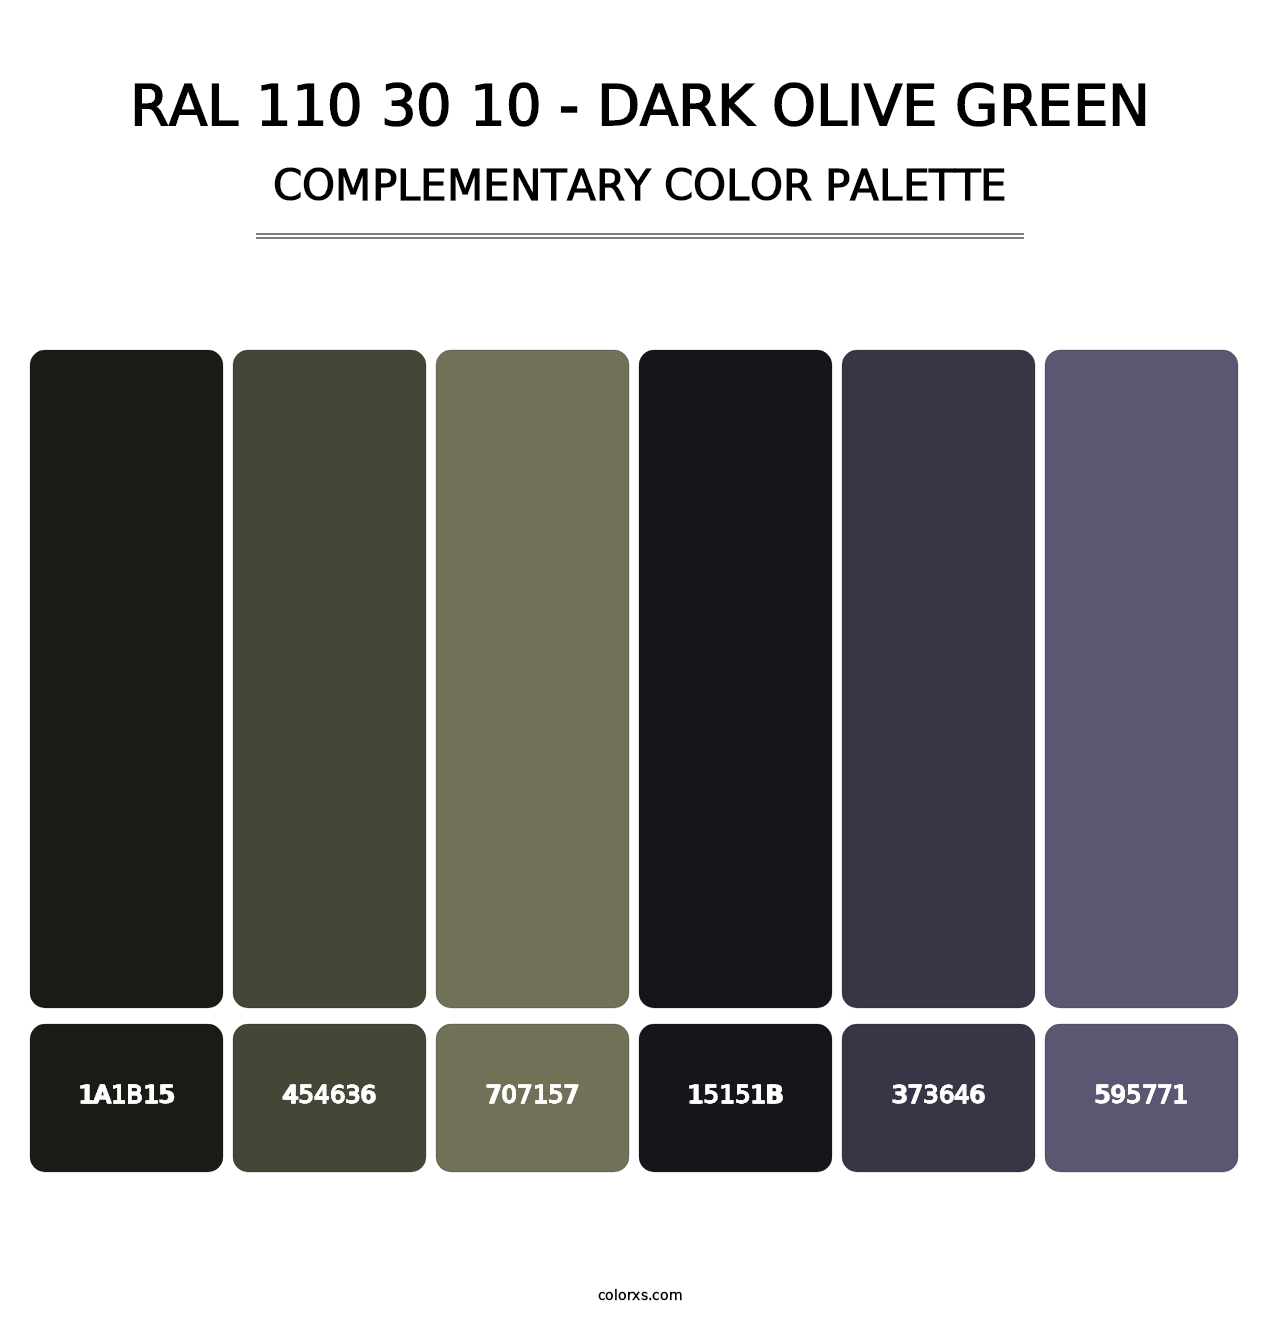 RAL 110 30 10 - Dark Olive Green - Complementary Color Palette